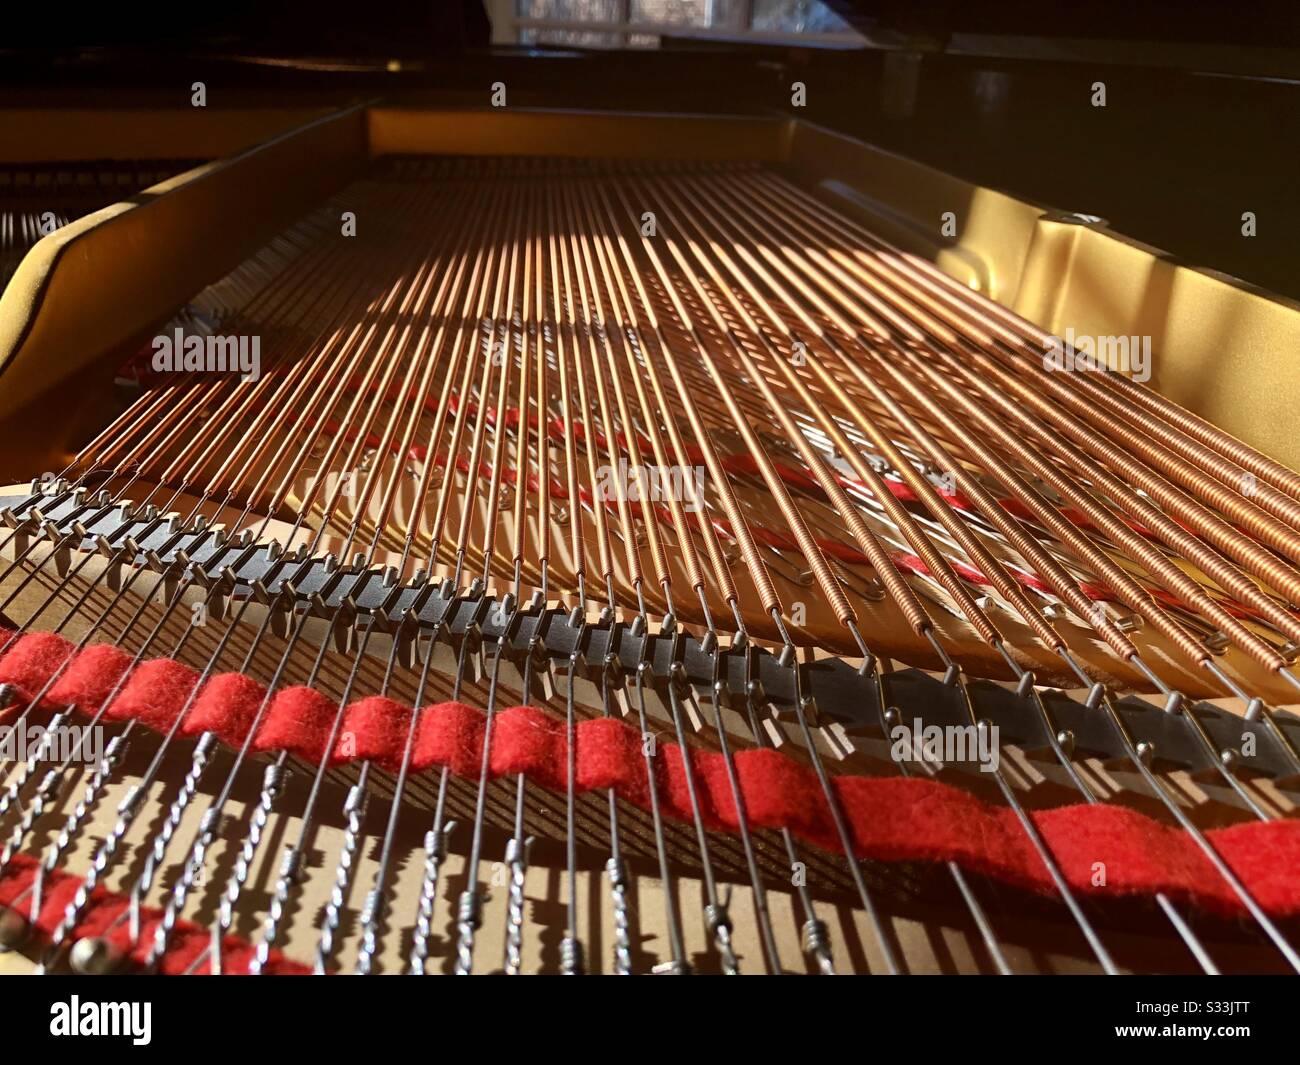 Headlong perspective of the inside of a baby grand piano.  Strings, felt, brass structure, and knots are visible. Stock Photo